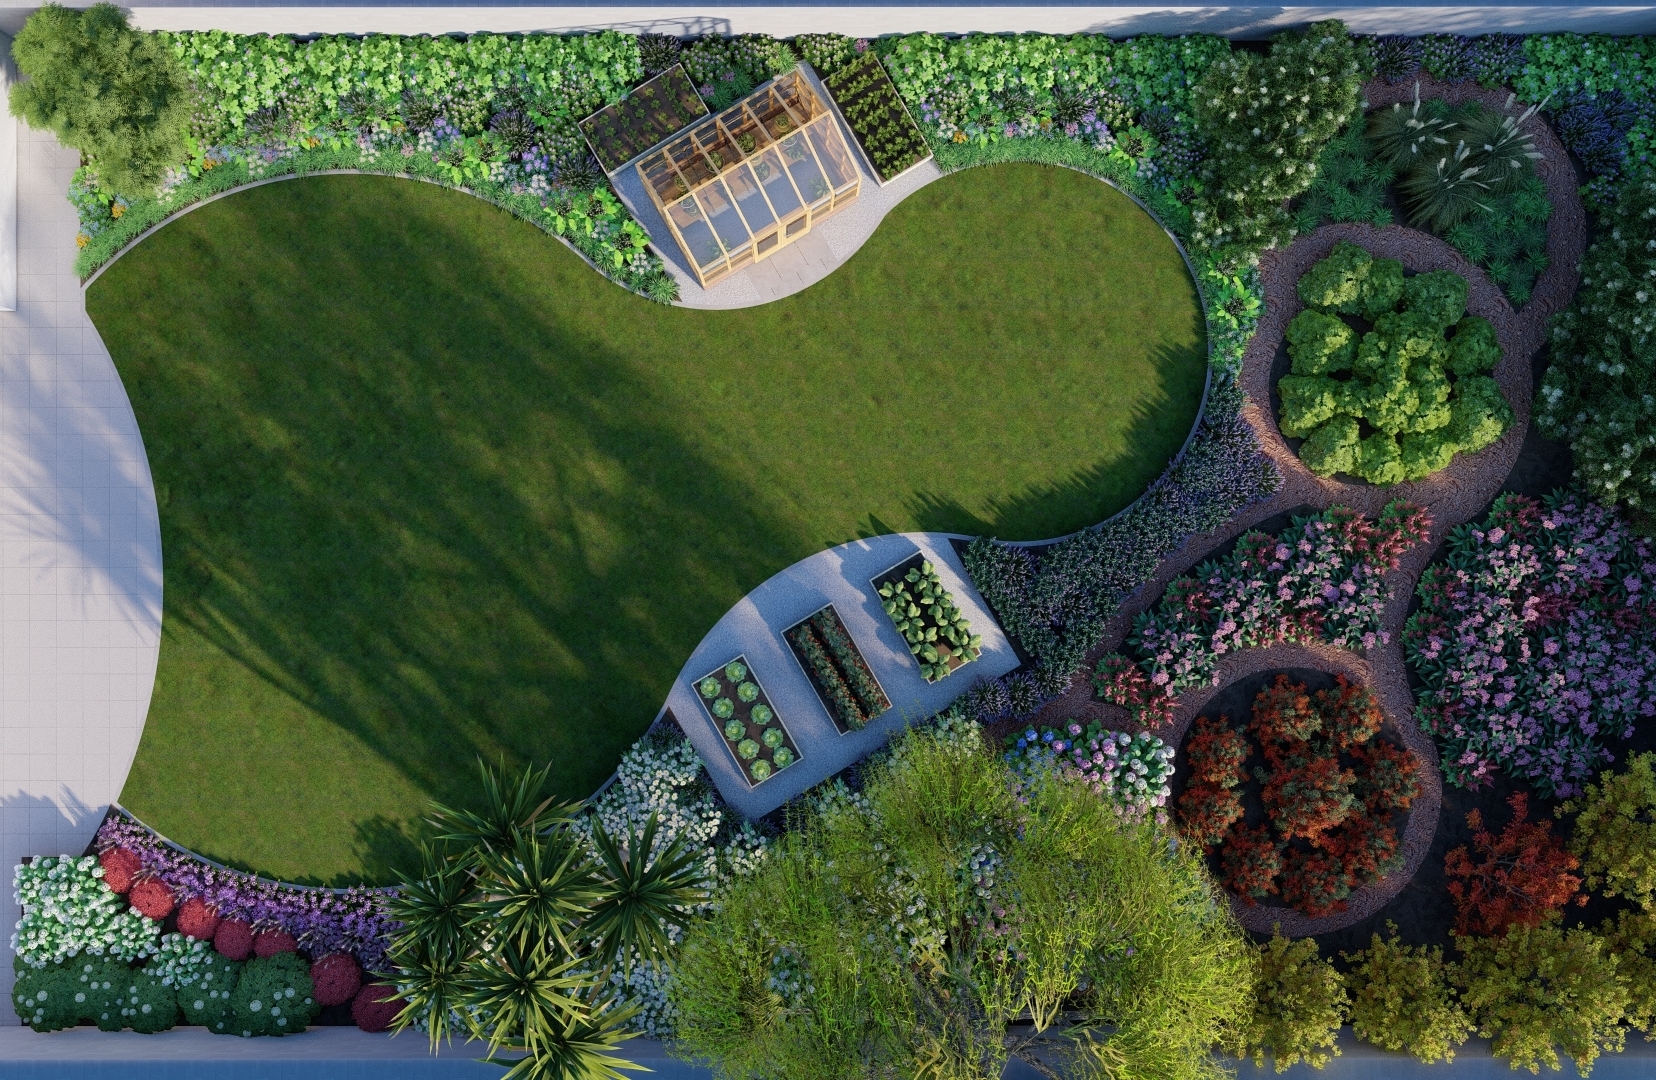 Design Visuals for a large Family Garden with Greenhouse, Growing Beds, extensive planted borders, beds and 'adventure' trail area featuring planted roundabouts/mounds in Knocklyon. ing bespoke horizontal timber screening, natural grass lawn, limestone paving, Biohort Garden Shed and mixed low maintenance  planting.